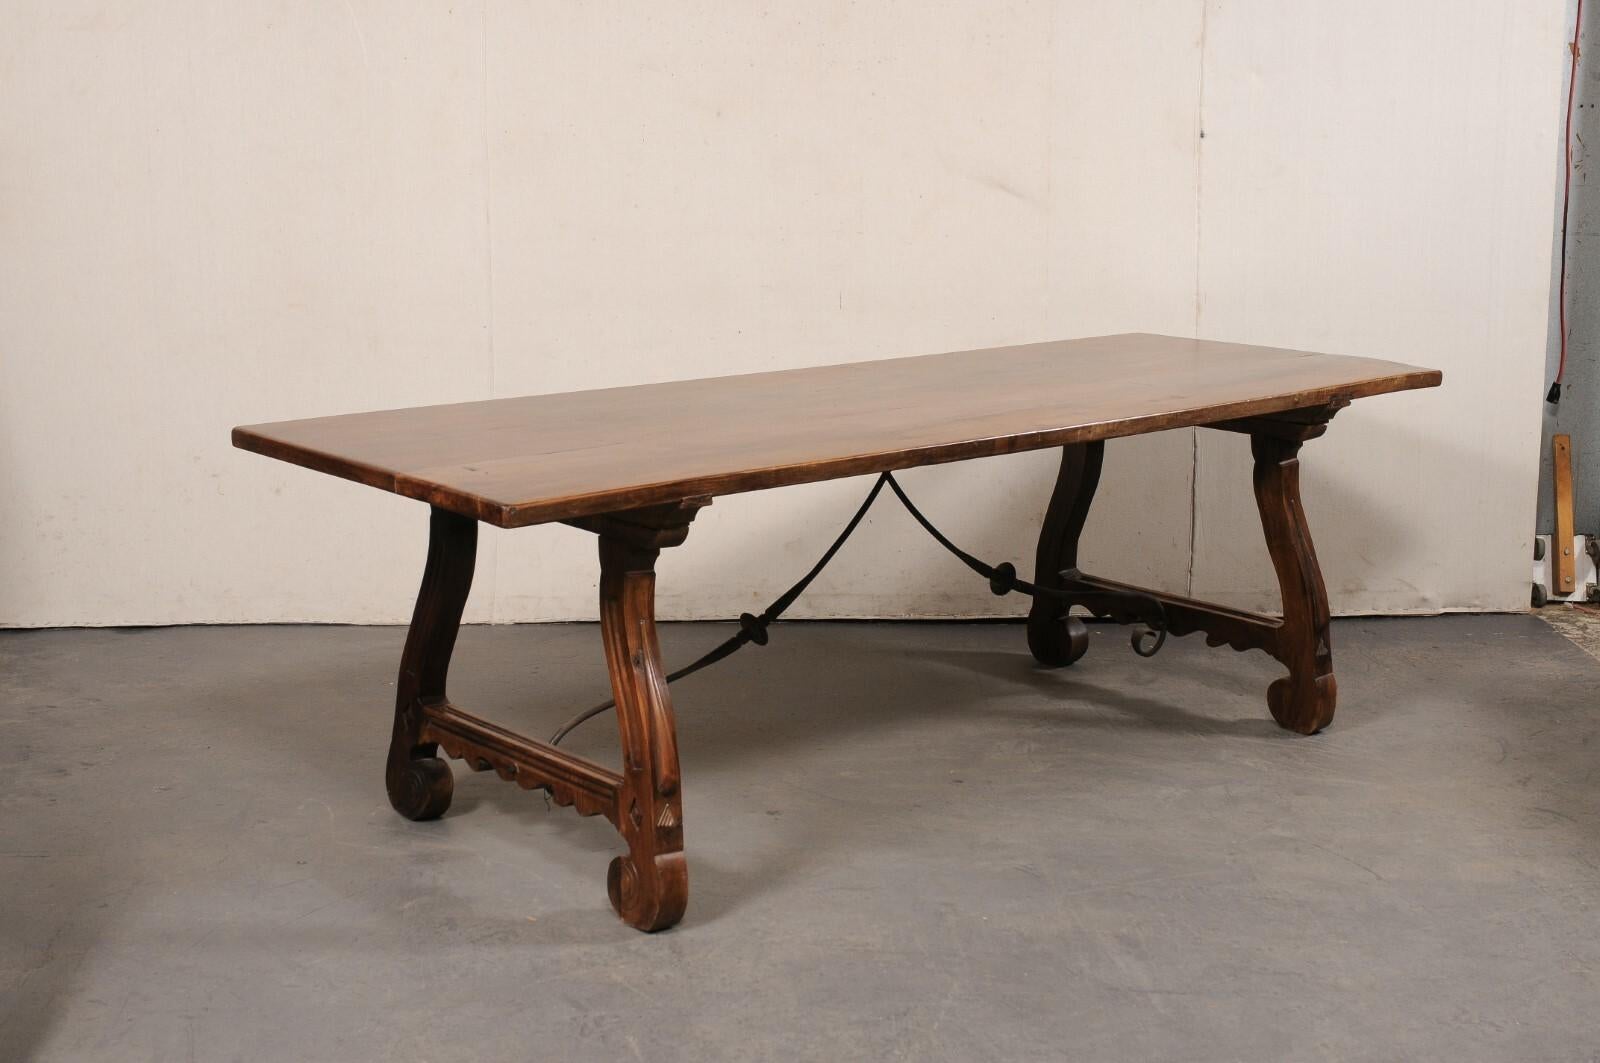 Spanish Carved Walnut Wood Trestle-Leg Table w/Forged Iron Stretcher, 8+ Ft Long For Sale 2